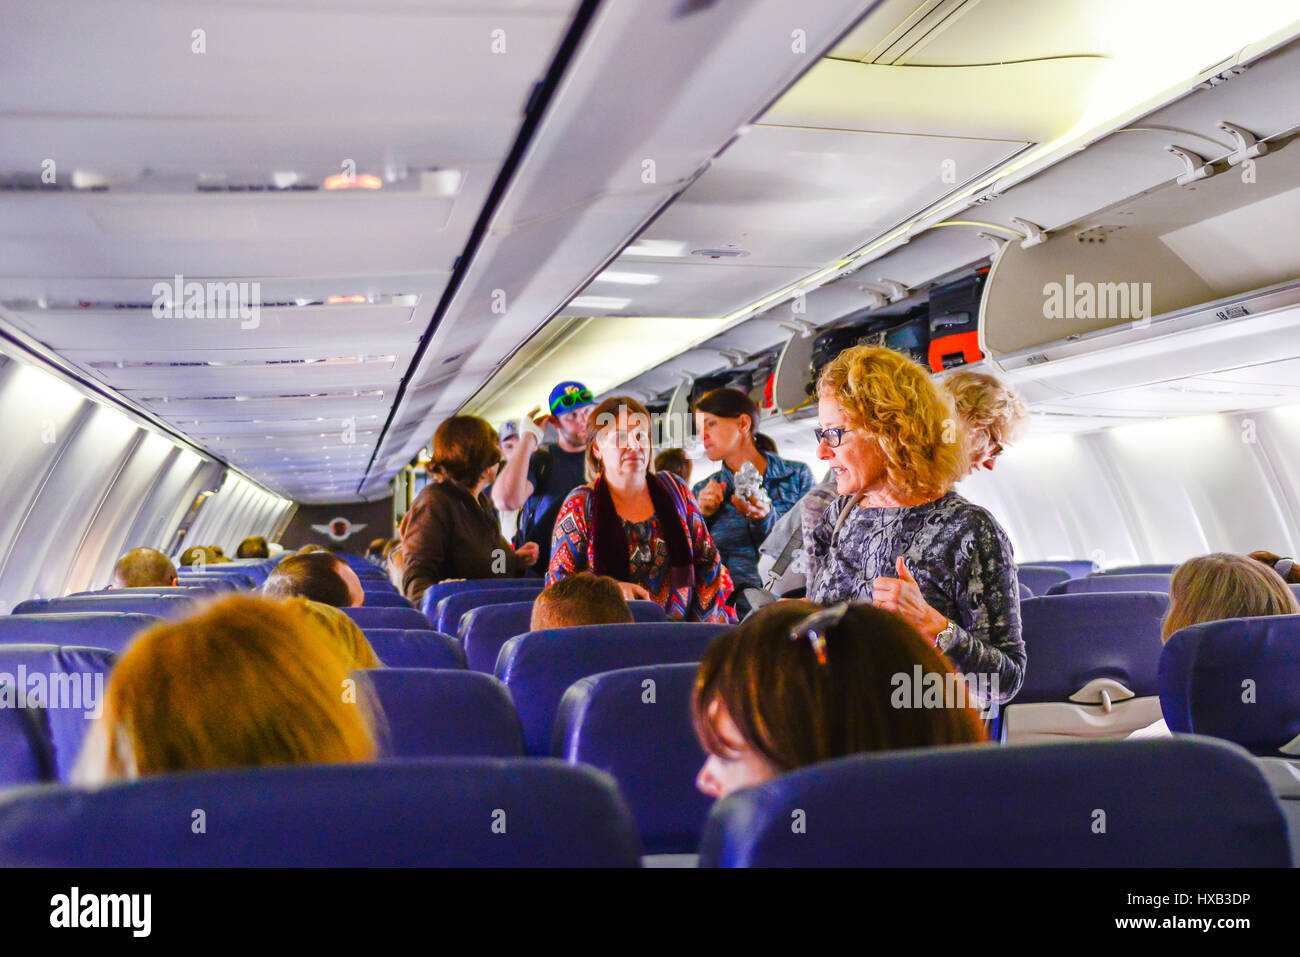 A view from the back of a commercial airplane of the cabin with people boarding, sitting & using overhead bins while flight attendants assist Stock Photo